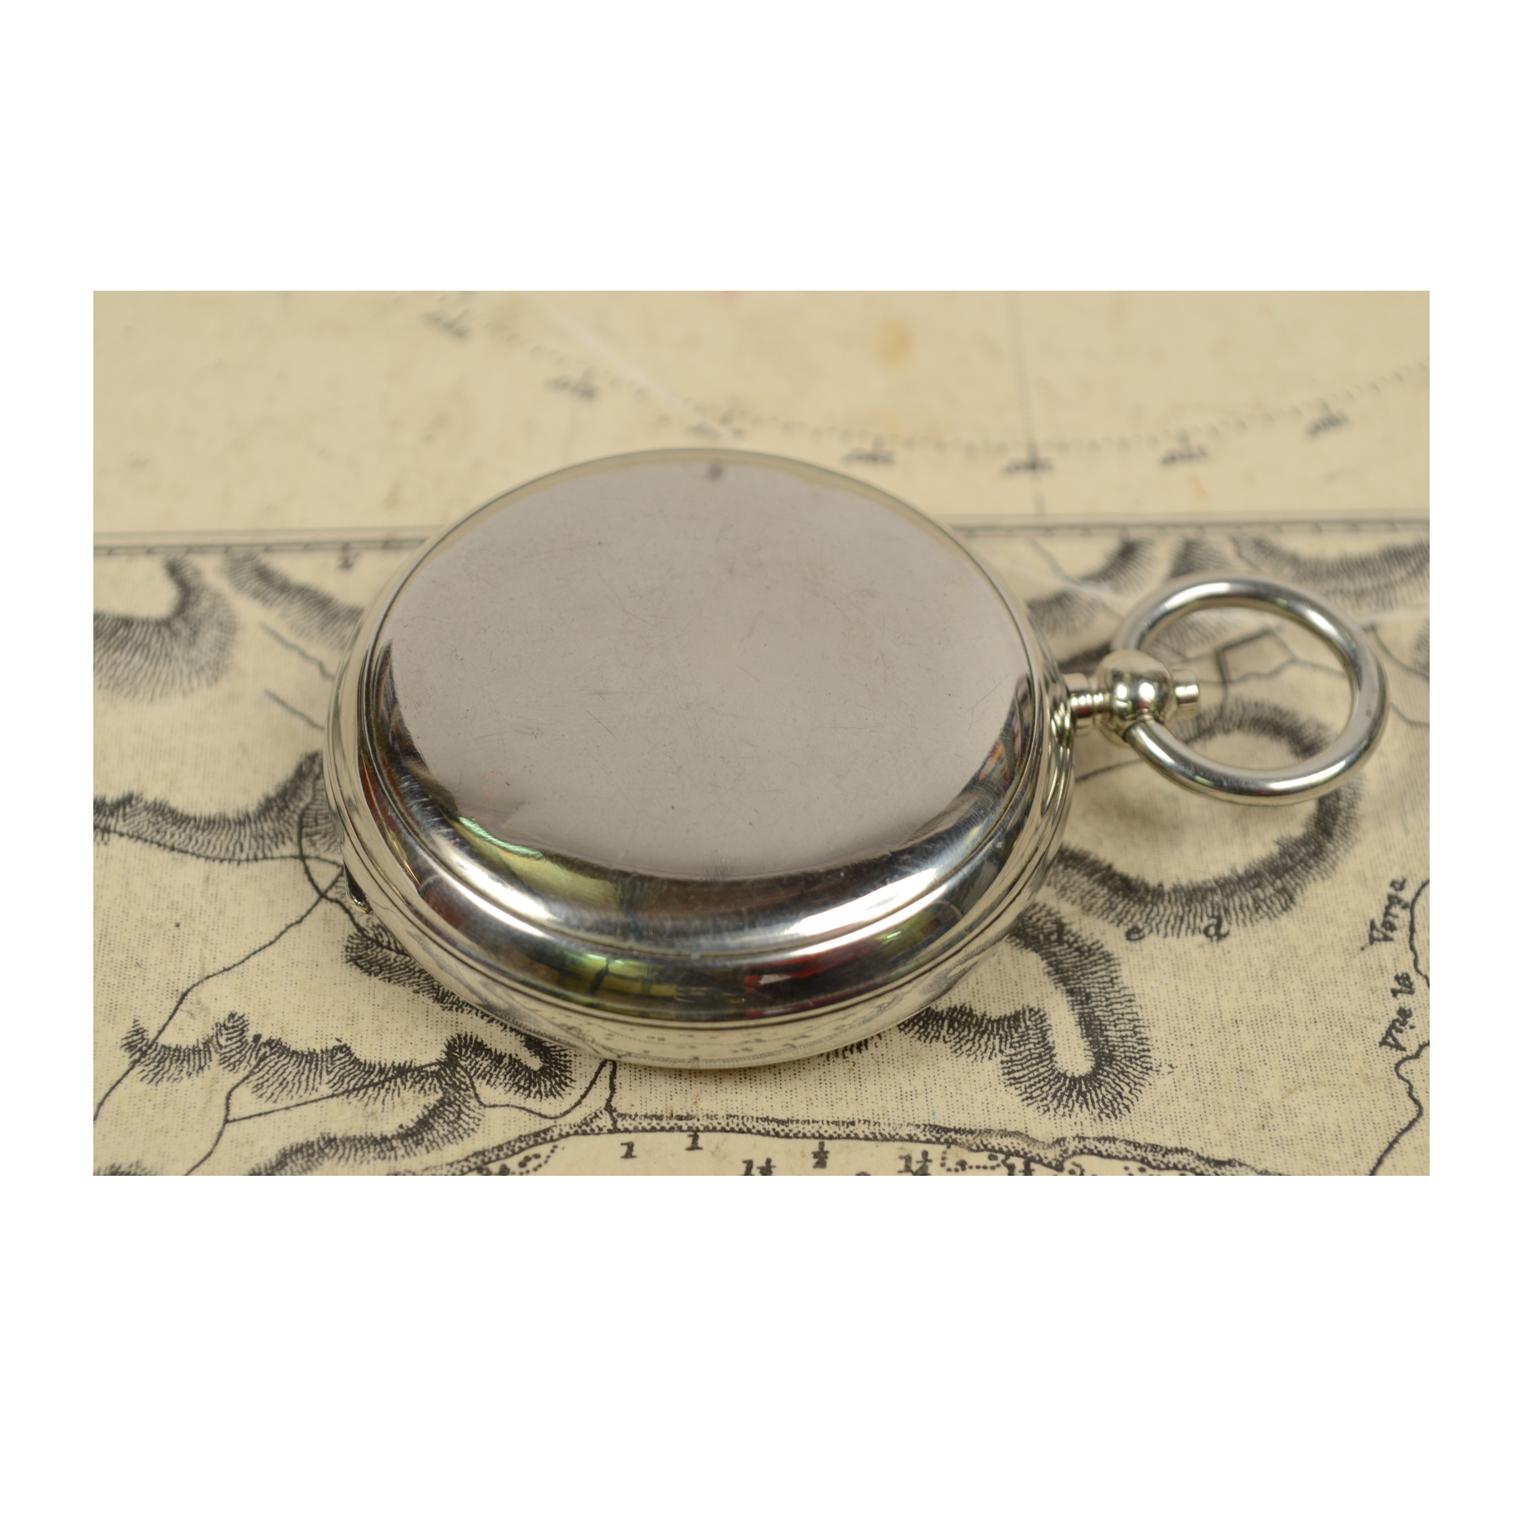 Pocket Compass Used by the Royal Air Force Officers in 1916 1